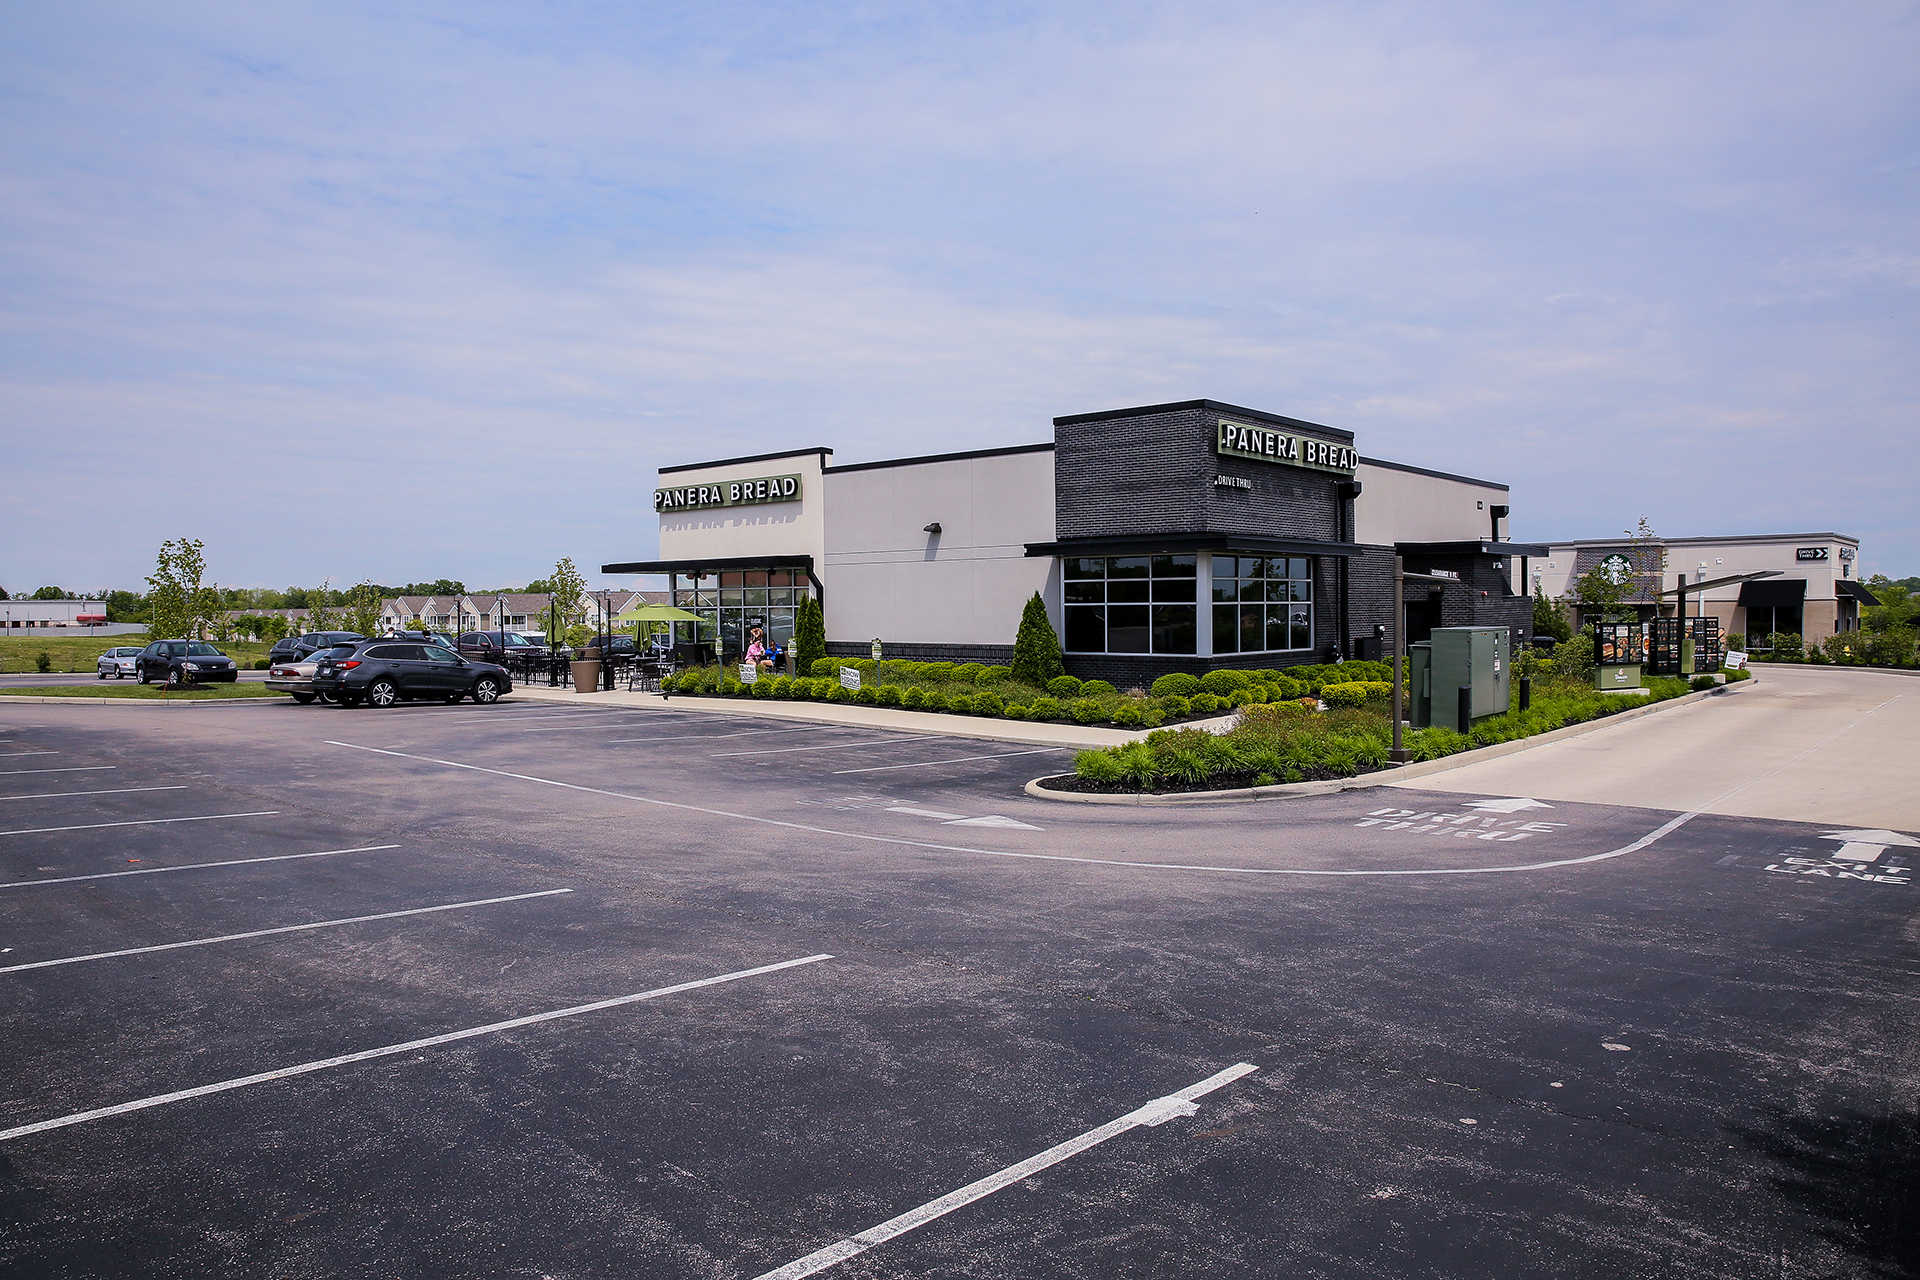 a parking lot and Panera restaurant building